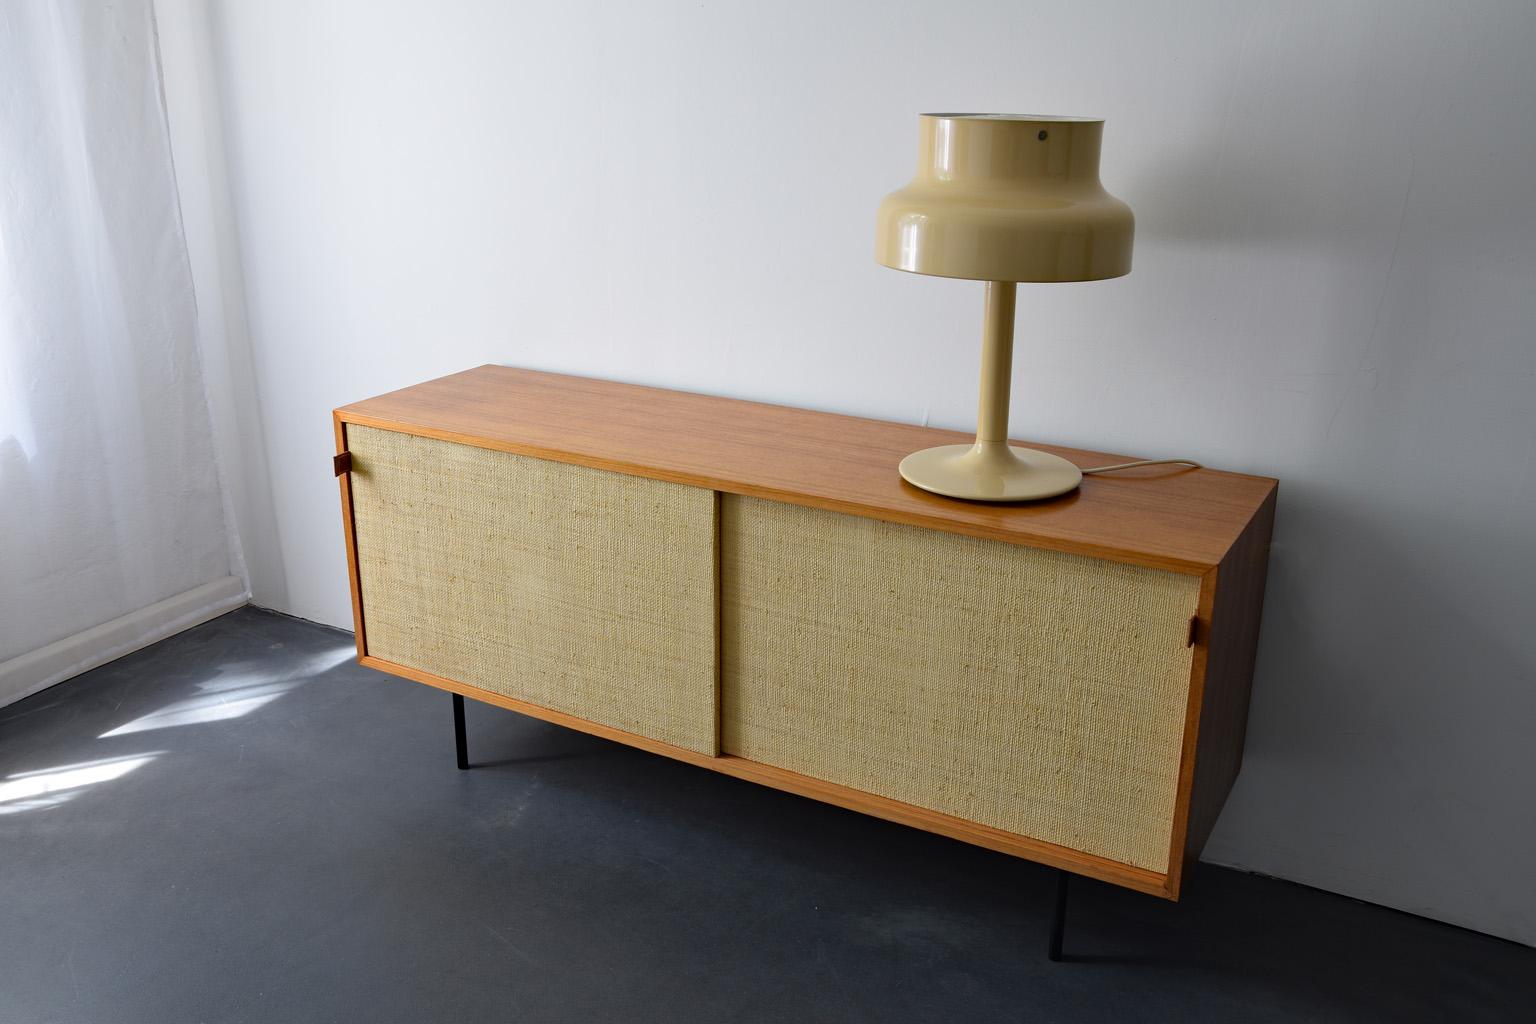 Bumling table lamp by Anders Pehrson for Atelje Lyktan, Sweden beige, 1970s.



 